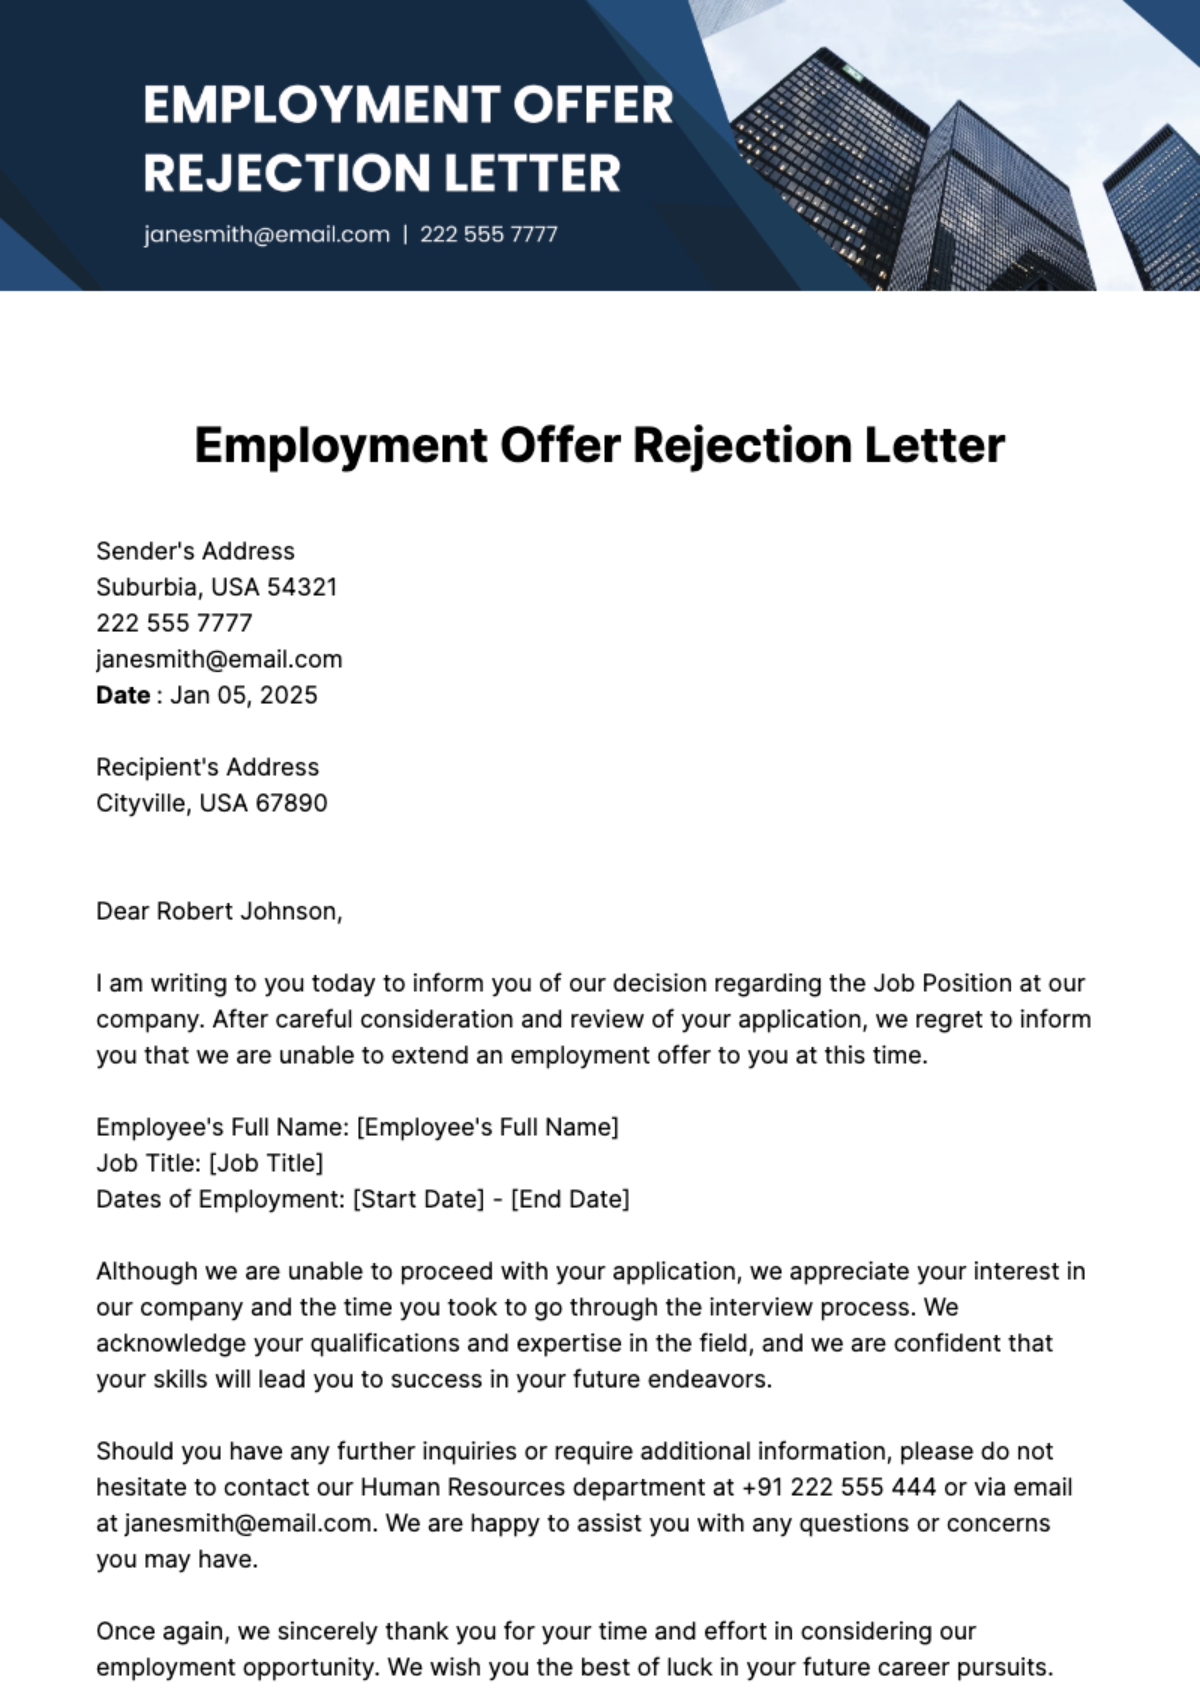 Employment Offer Rejection Letter Template